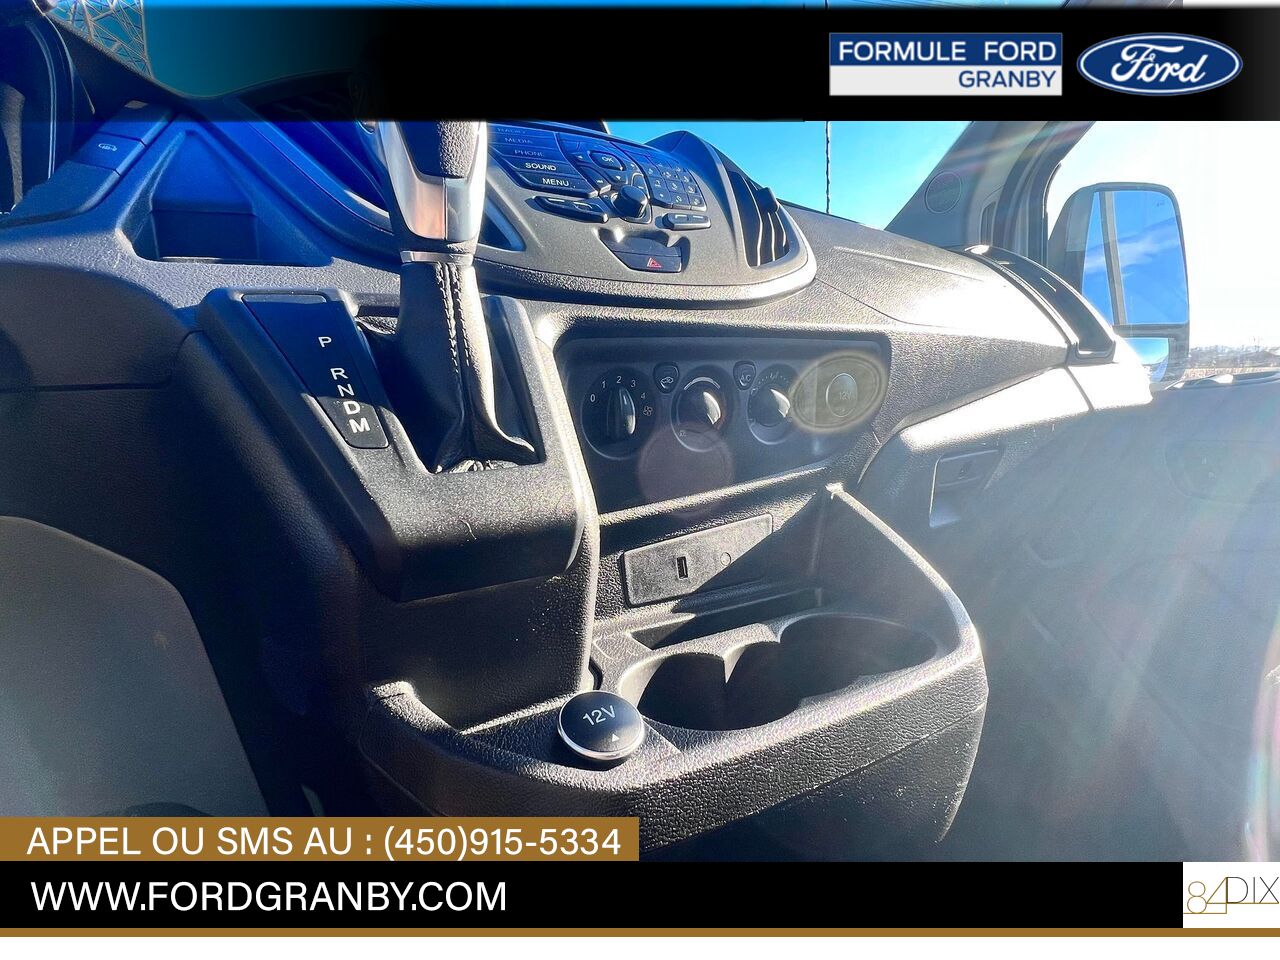 Ford Transit fourgon utilitaire 2019 Granby - photo #16